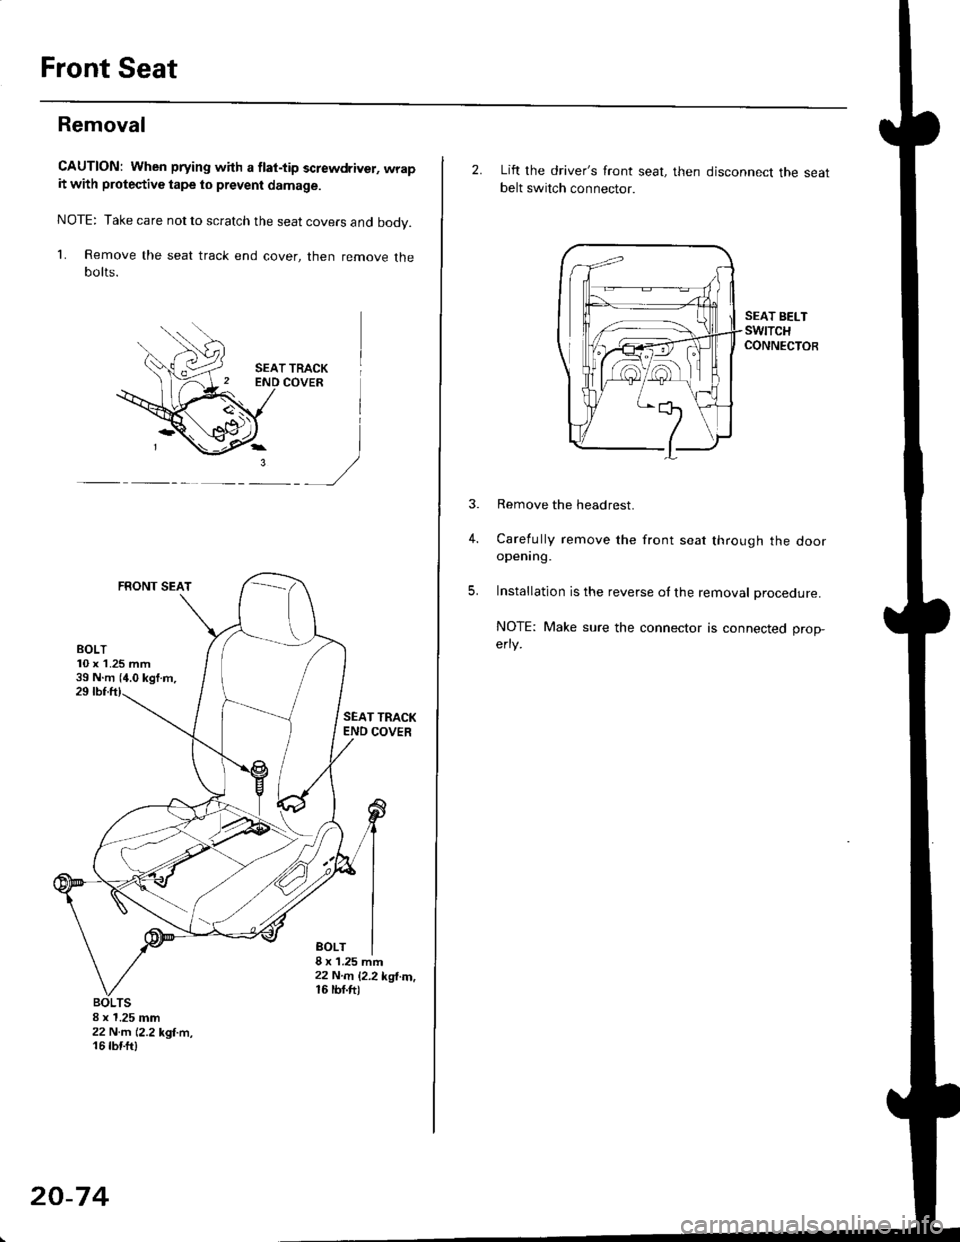 HONDA CIVIC 1996 6.G Workshop Manual Front Seat
Removal
CAUTION: When prying with a flat-tip screwdriver, wrapit with protective tape lo prevent damage.
NOTE: Take care not to scratch the seat covers and body.
1. Remove the seat track en